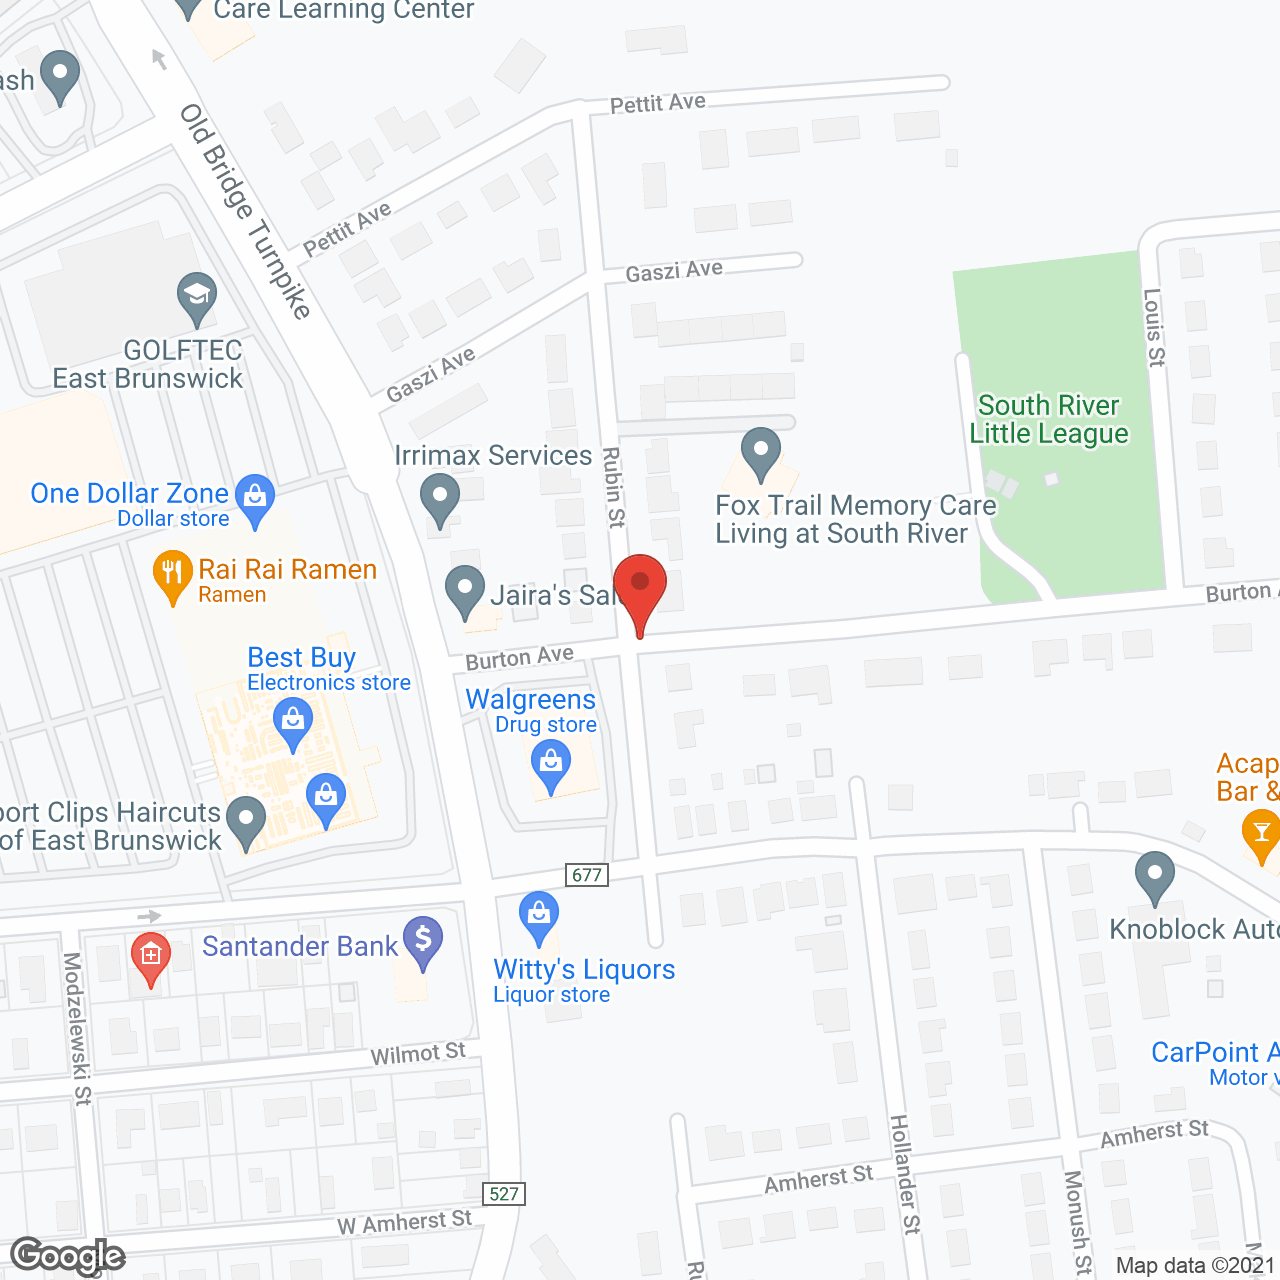 Fox Trail Memory Care Living at South River in google map